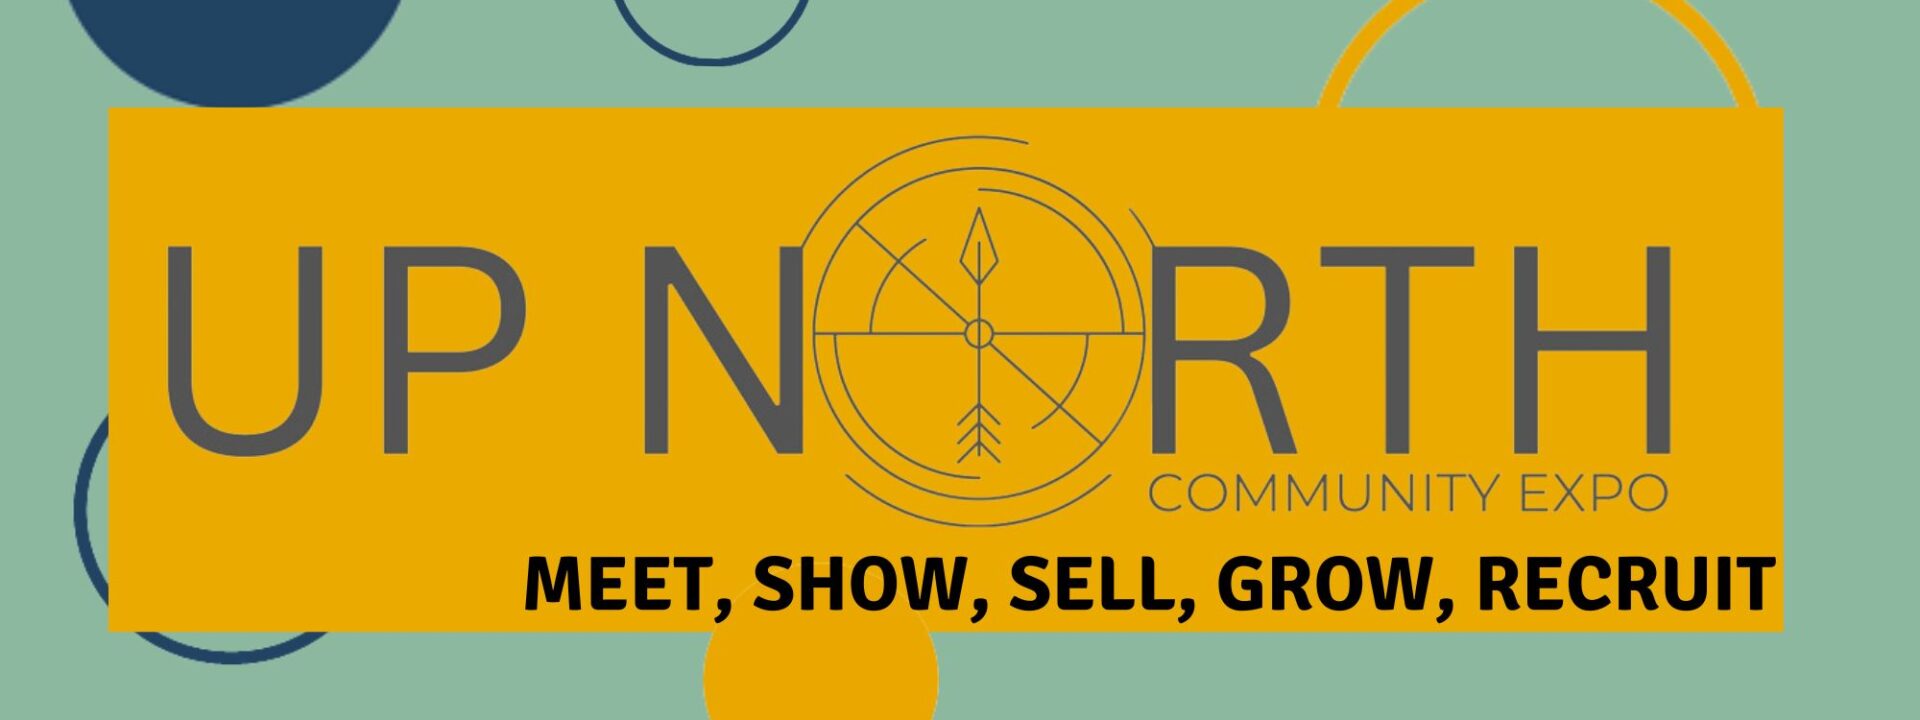 Up North Community Expo